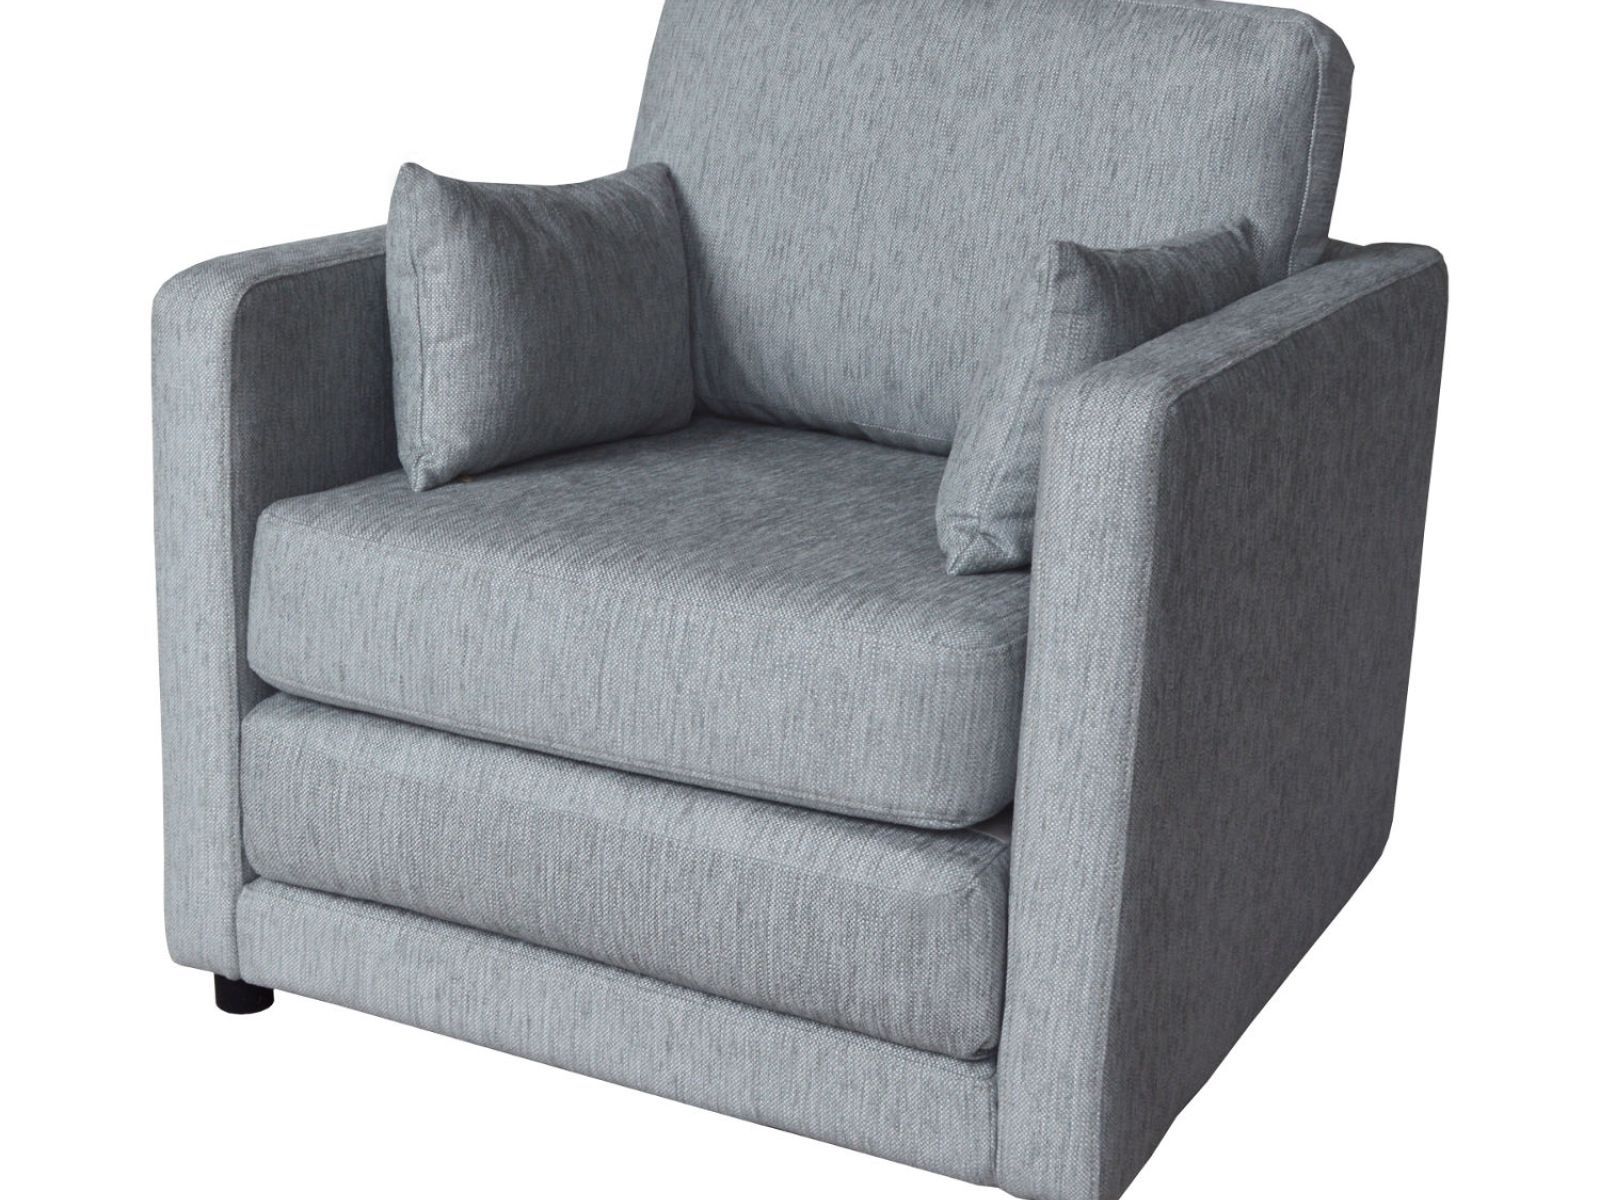 Sofas Center 442d955ccd012f2ae6c00a288dfe841191e7de9e H A Haru For Single Sofa Bed Chairs (View 11 of 15)